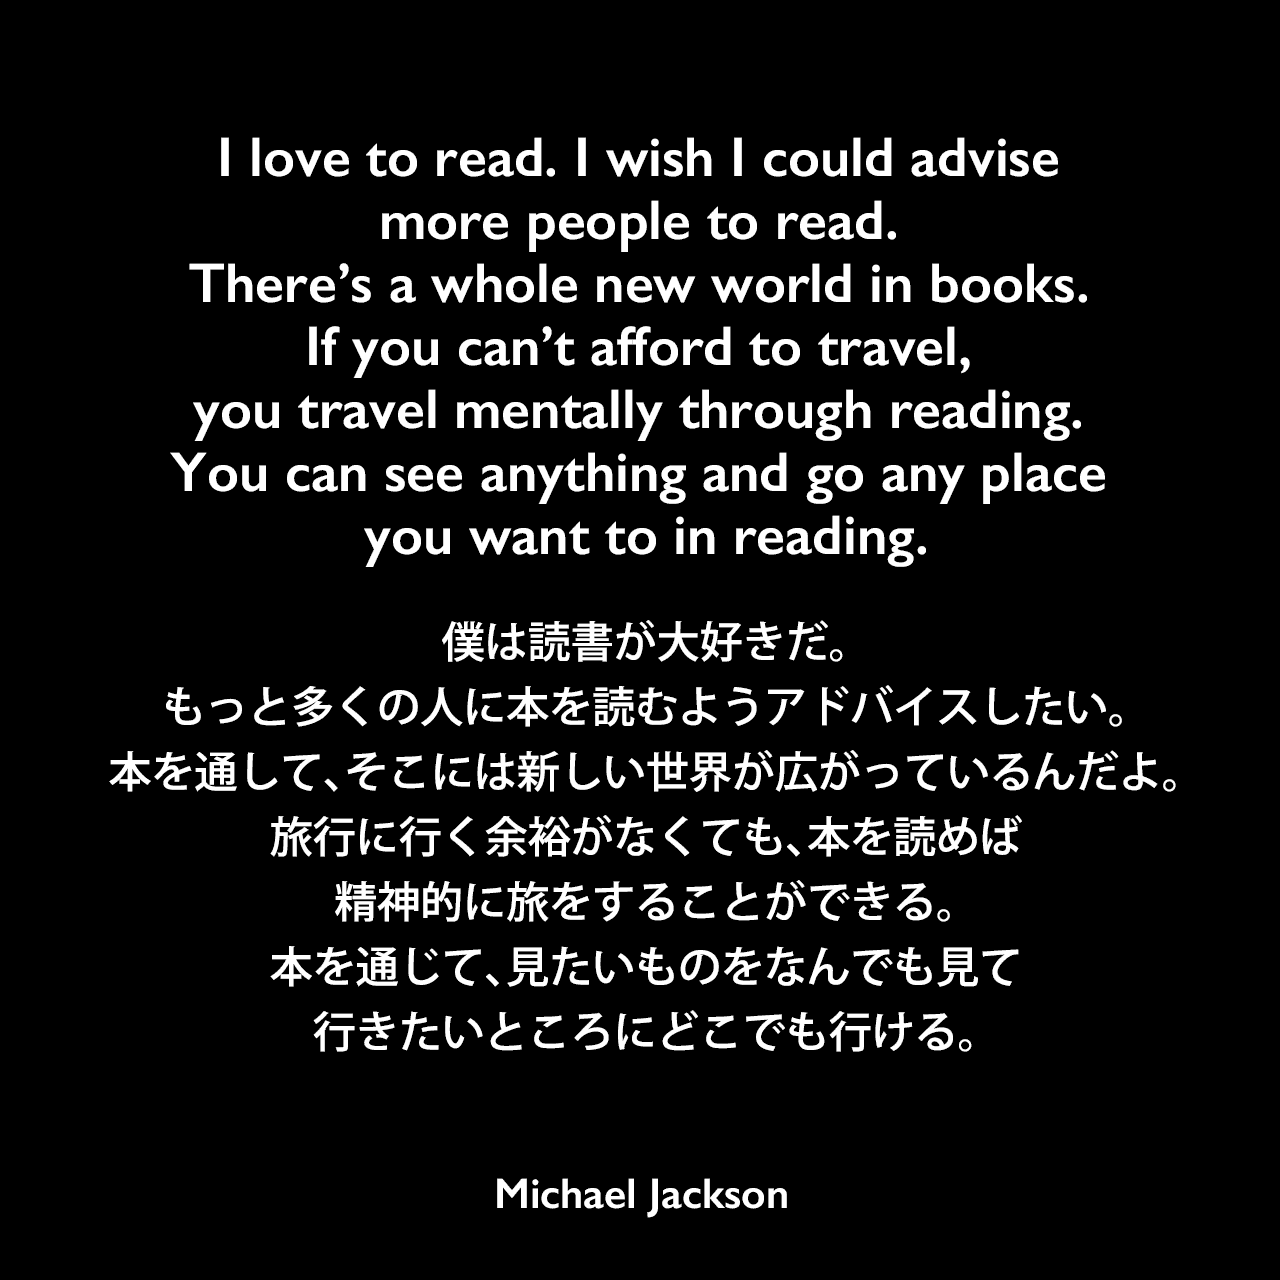 I love to read. I wish I could advise more people to read. There’s a whole new world in books. If you can’t afford to travel, you travel mentally through reading. You can see anything and go any place you want to in reading.僕は読書が大好きだ。もっと多くの人に本を読むようアドバイスしたい。本を通して、そこには新しい世界が広がっているんだよ。旅行に行く余裕がなくても、本を読めば精神的に旅をすることができる。本を通じて、見たいものをなんでも見て、行きたいところにどこでも行ける。Michael Jackson